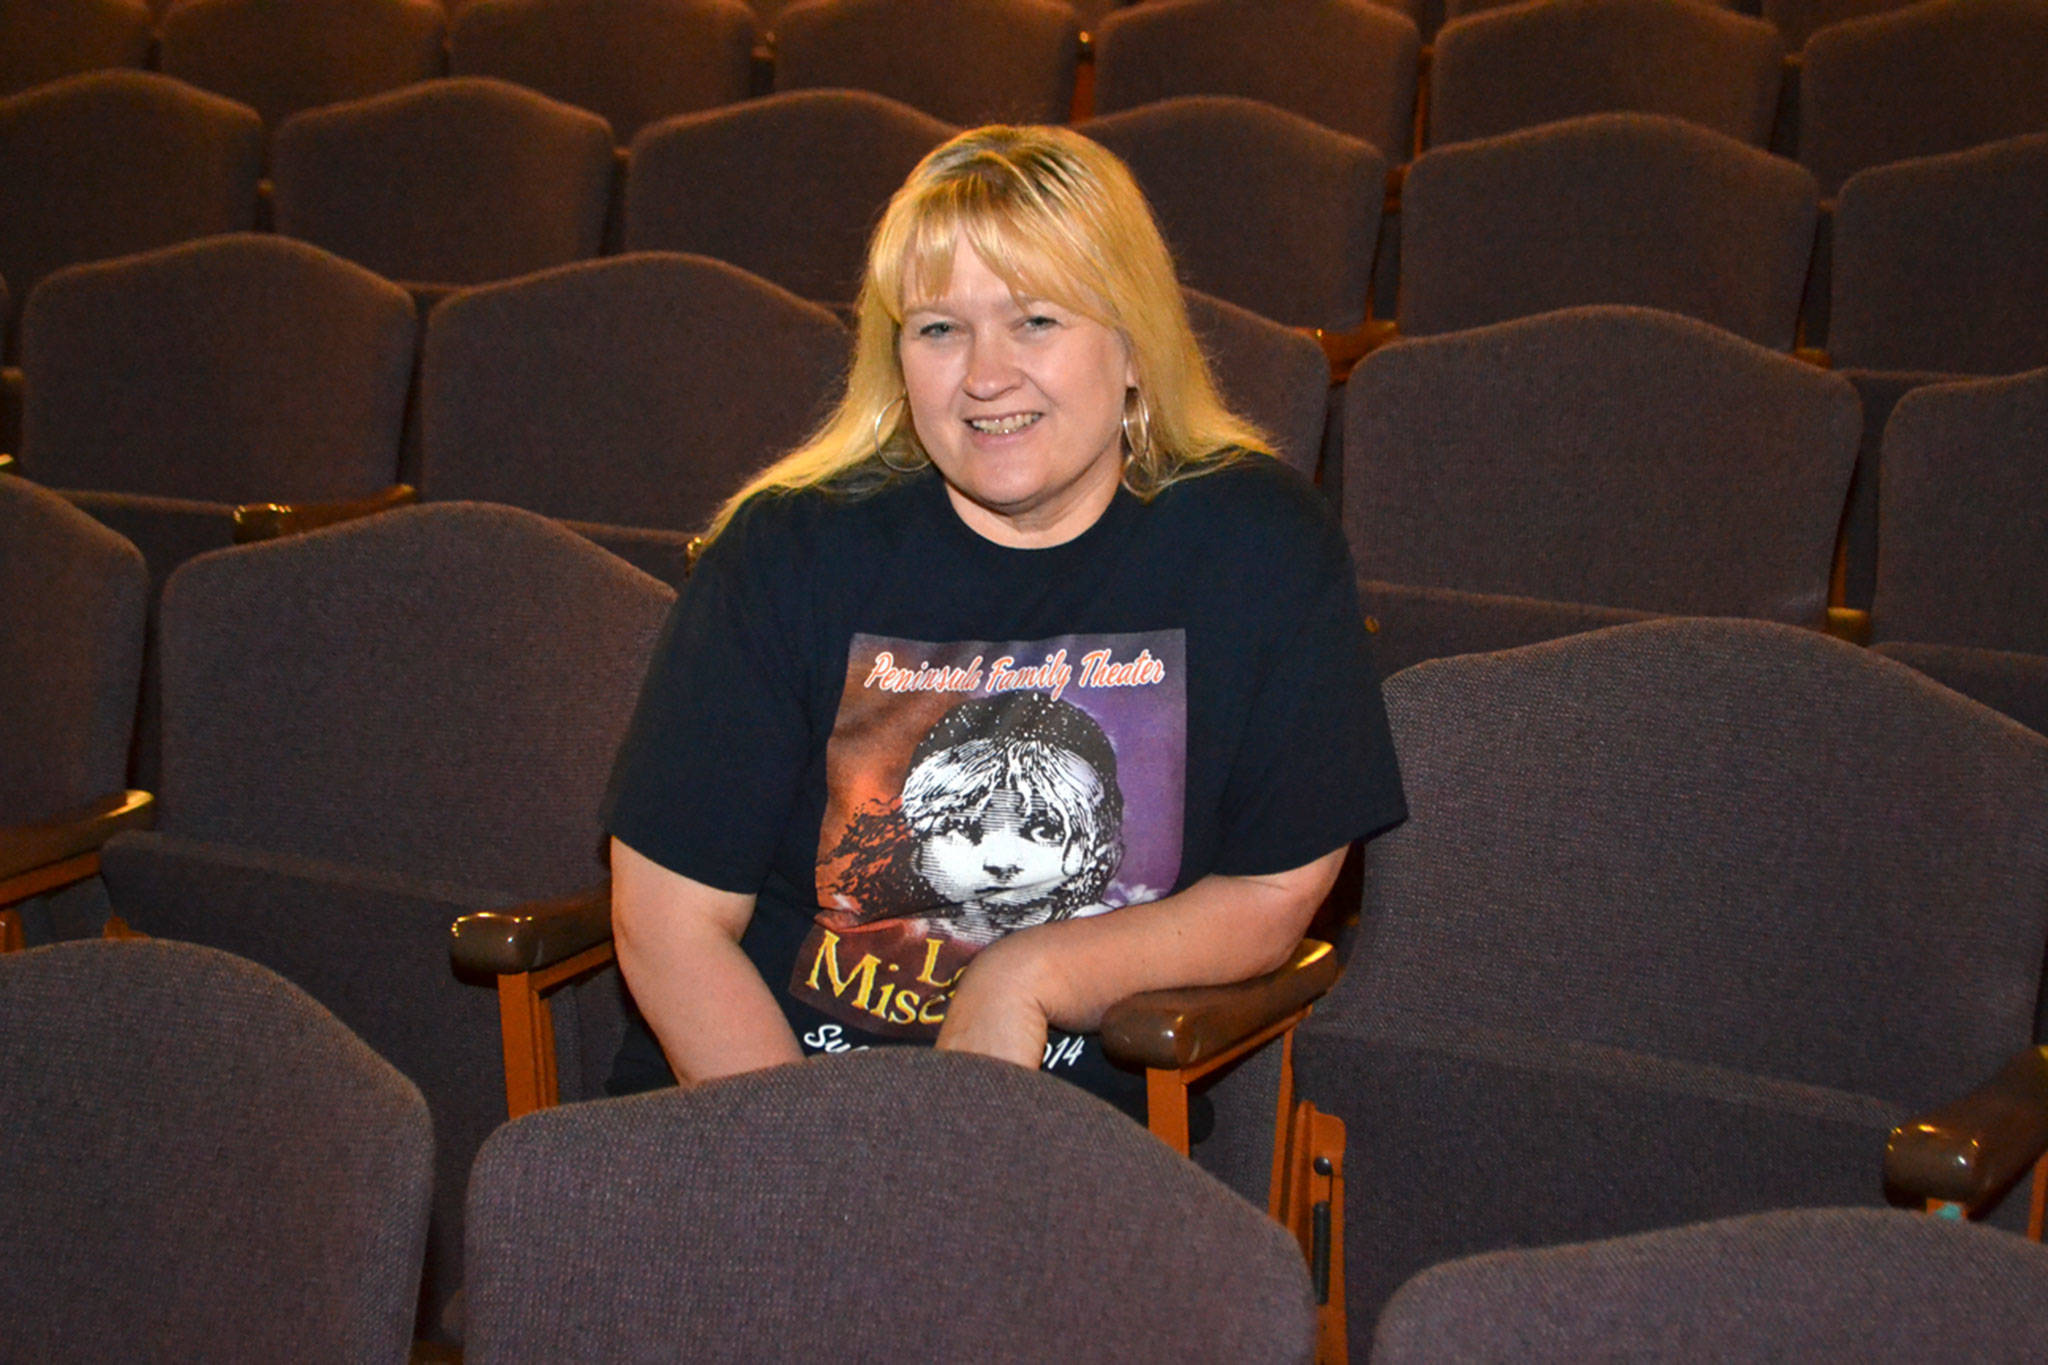 Matthew Nash/Olympic Peninsula News Group                                Robin Hall, 53, sits in the auditorium at Sequim High School in 2014 where she’s officially led plays for the school since 2011. A few weeks ago her contract wasn’t renewed because the school district now requires after school instructors like her to hold a teaching certificate.                                Robin Hall, 53, sits in the auditorium at Sequim High School in 2014 where she’s officially led plays for the school since 2011. A few weeks ago her contract wasn’t renewed because the school district now requires after school instructors like her to hold a teaching certificate. (Matthew Nash/Olympic Peninsula News Group)